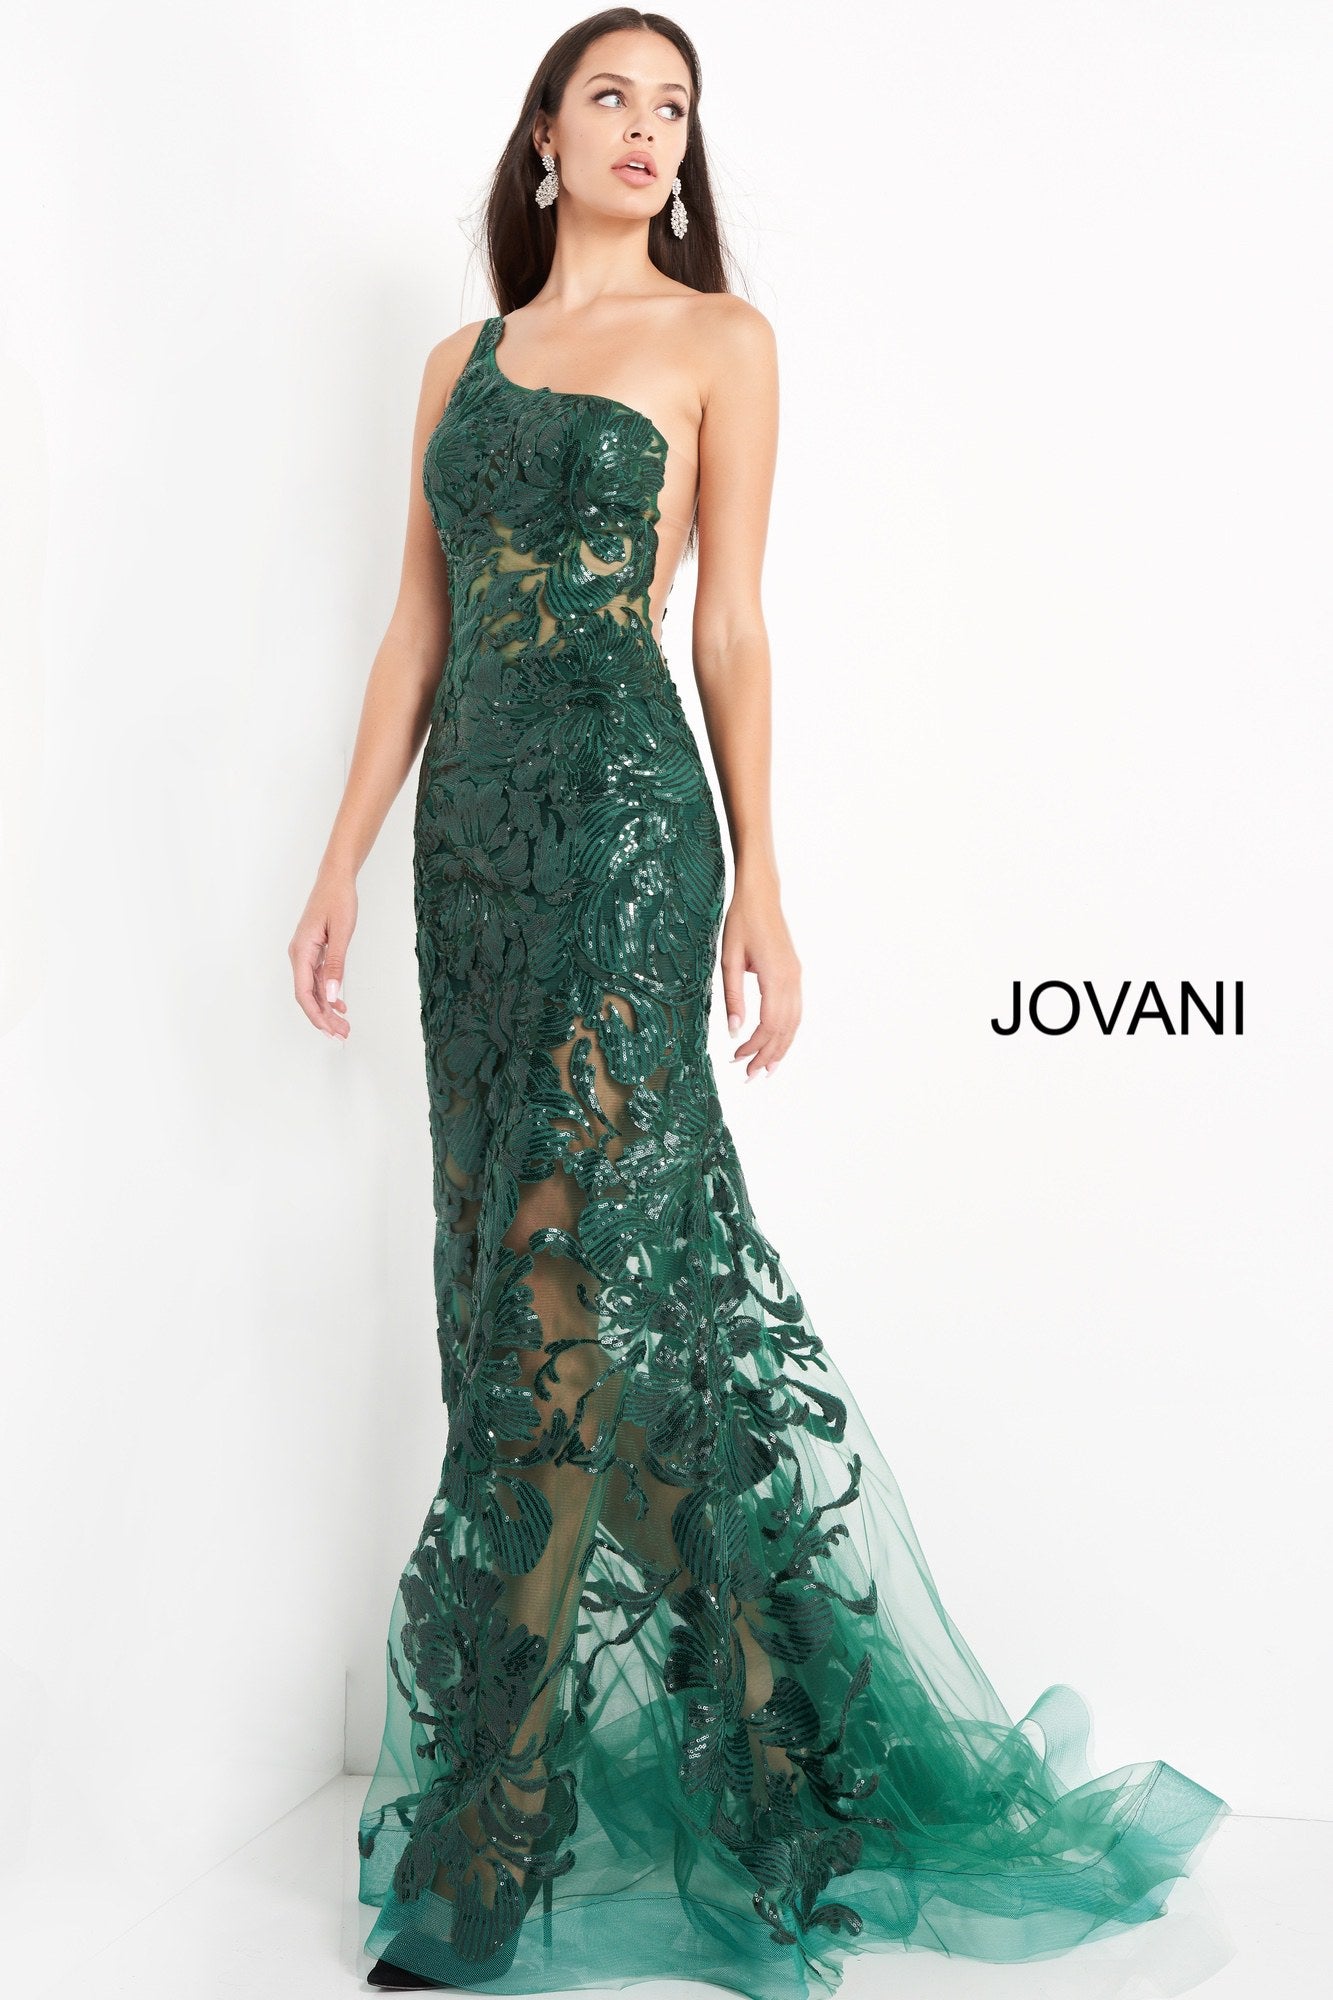 Jovani 02895 is a long fitted one shoulder formal evening gown. Featuring a sheer fitted bodice and skirt. Sequin embellished lace appliques. Mermaid silhouette. sheer side panels with mesh insert. sweeping train with horse hair trim. Great Prom & Pageant Dress.  Available Sizes: 00,0,2,4,6,8,10,12,14,16,18,20,22,24  Available Colors: black, forest, light-blue, red, rose/gold, royal, w